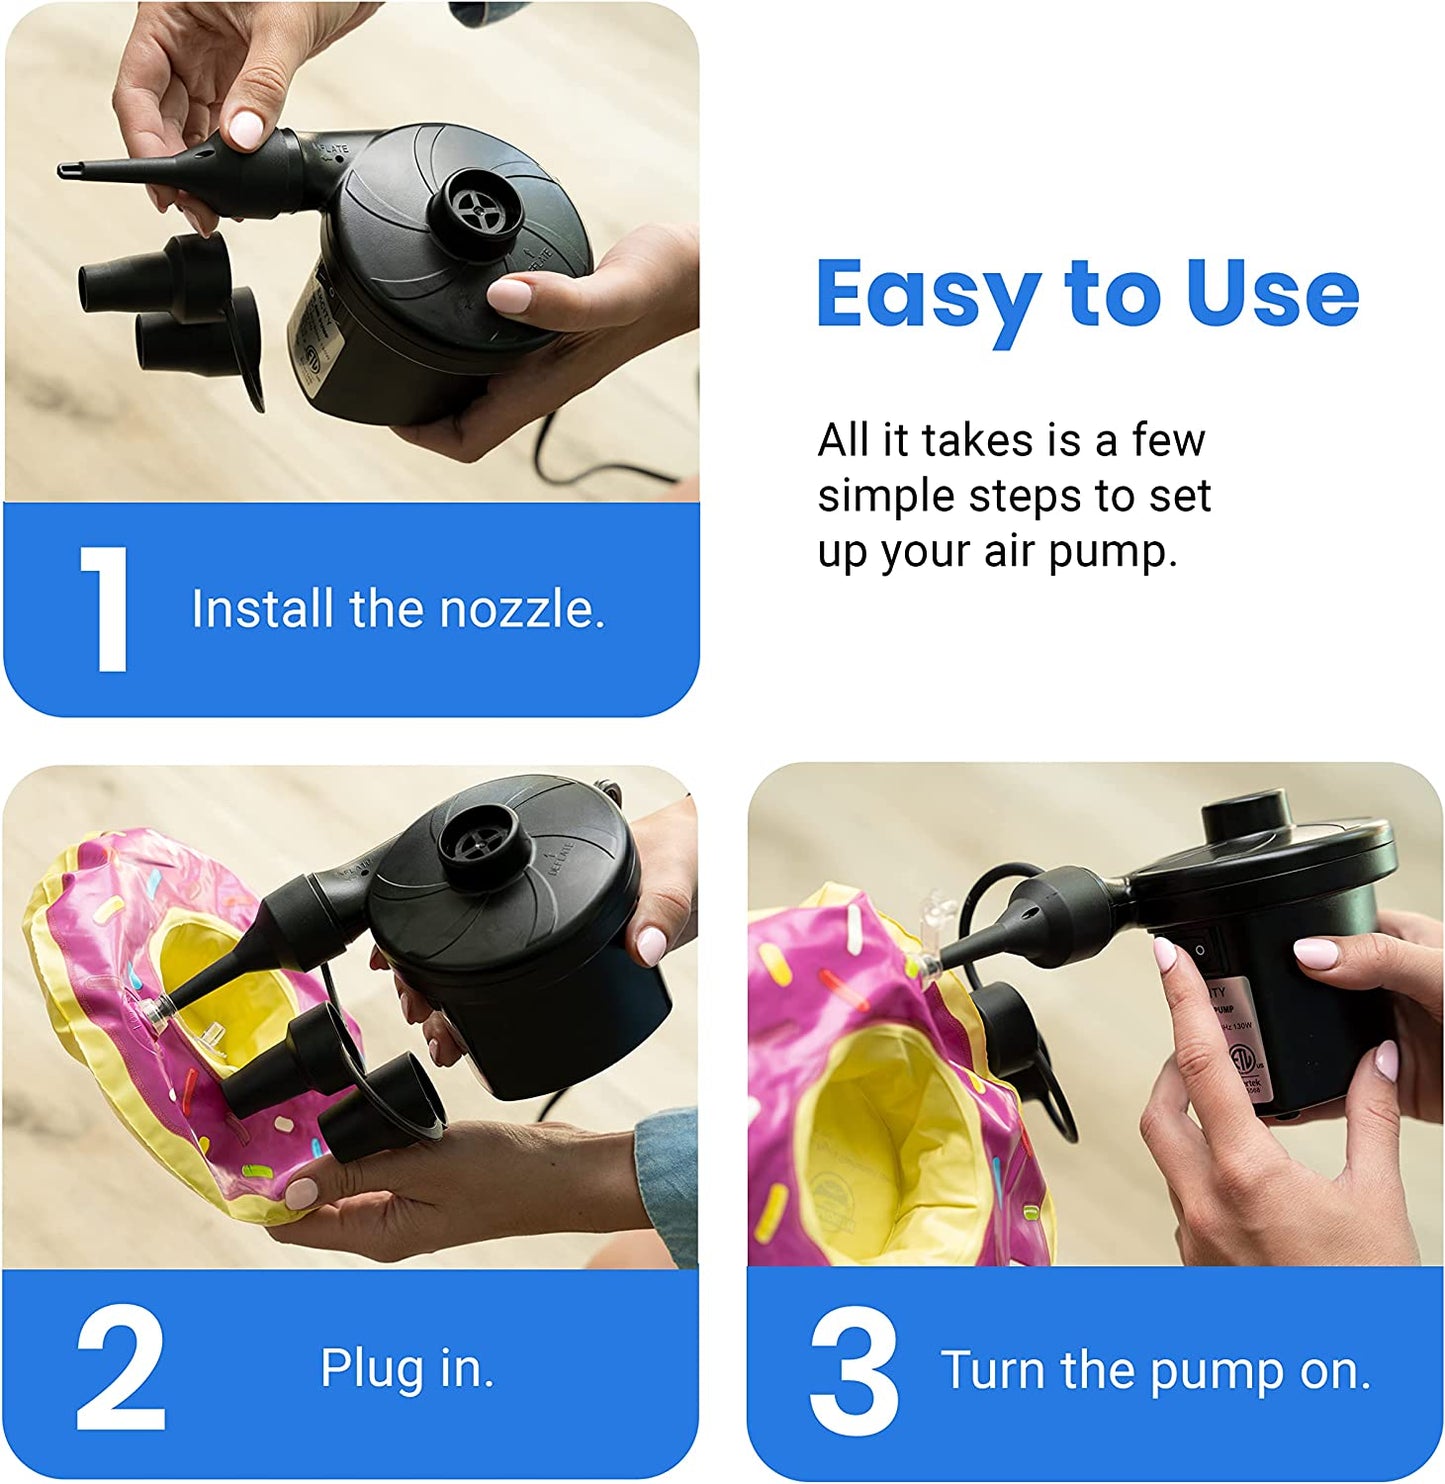 "Easy-Inflate Electric Air Pump: Effortlessly Inflate Your Air Mattress, Pool Floats, and More! Portable, Quick-Fill AC Inflator with 3 Nozzles - Perfect for Camping and Summer Fun - 110-120 Volt, Sleek Black Design"